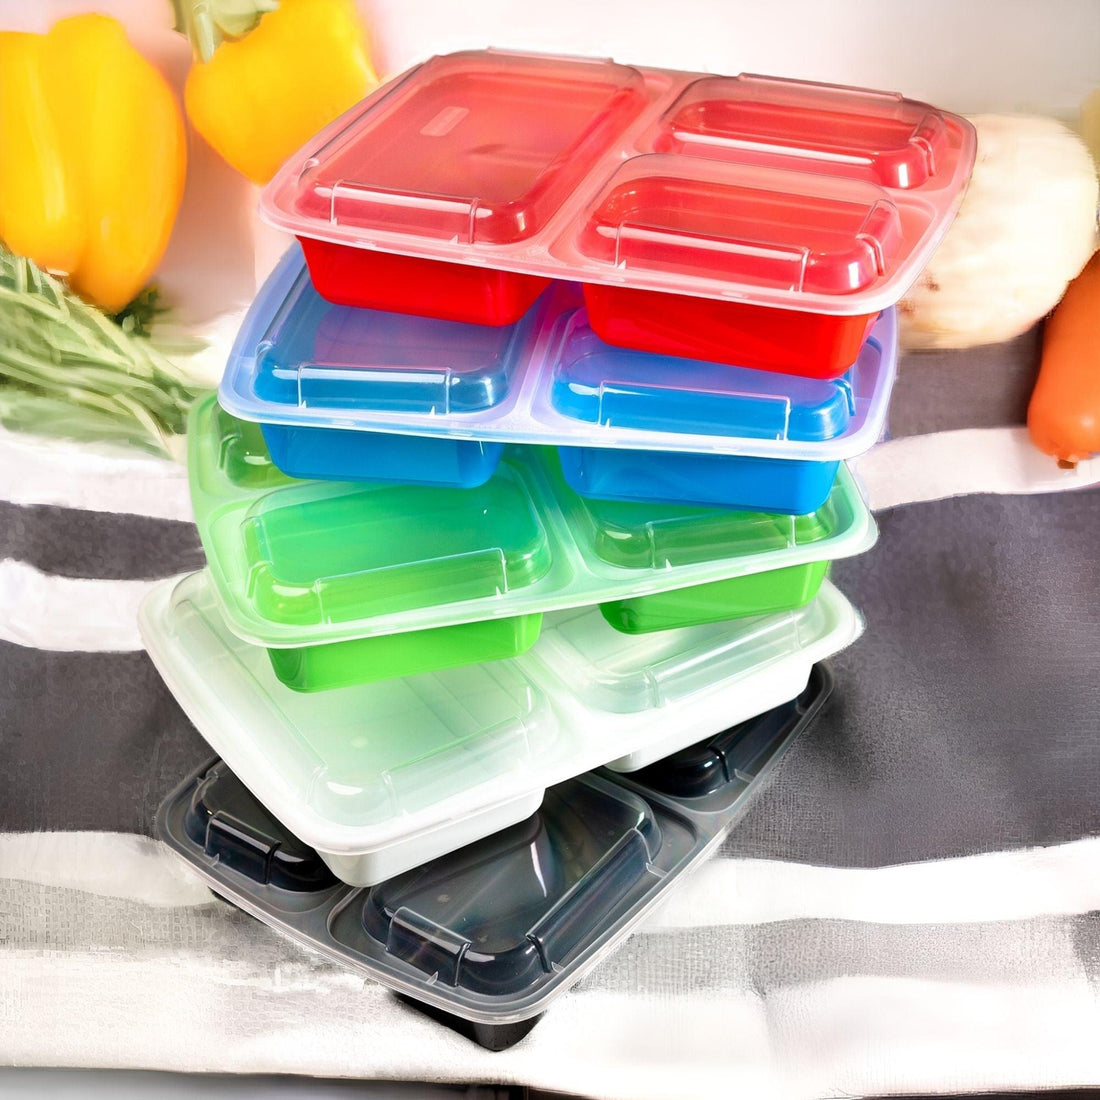 Meal Prepping with Containers of Different Colours - Jugglebox Australia